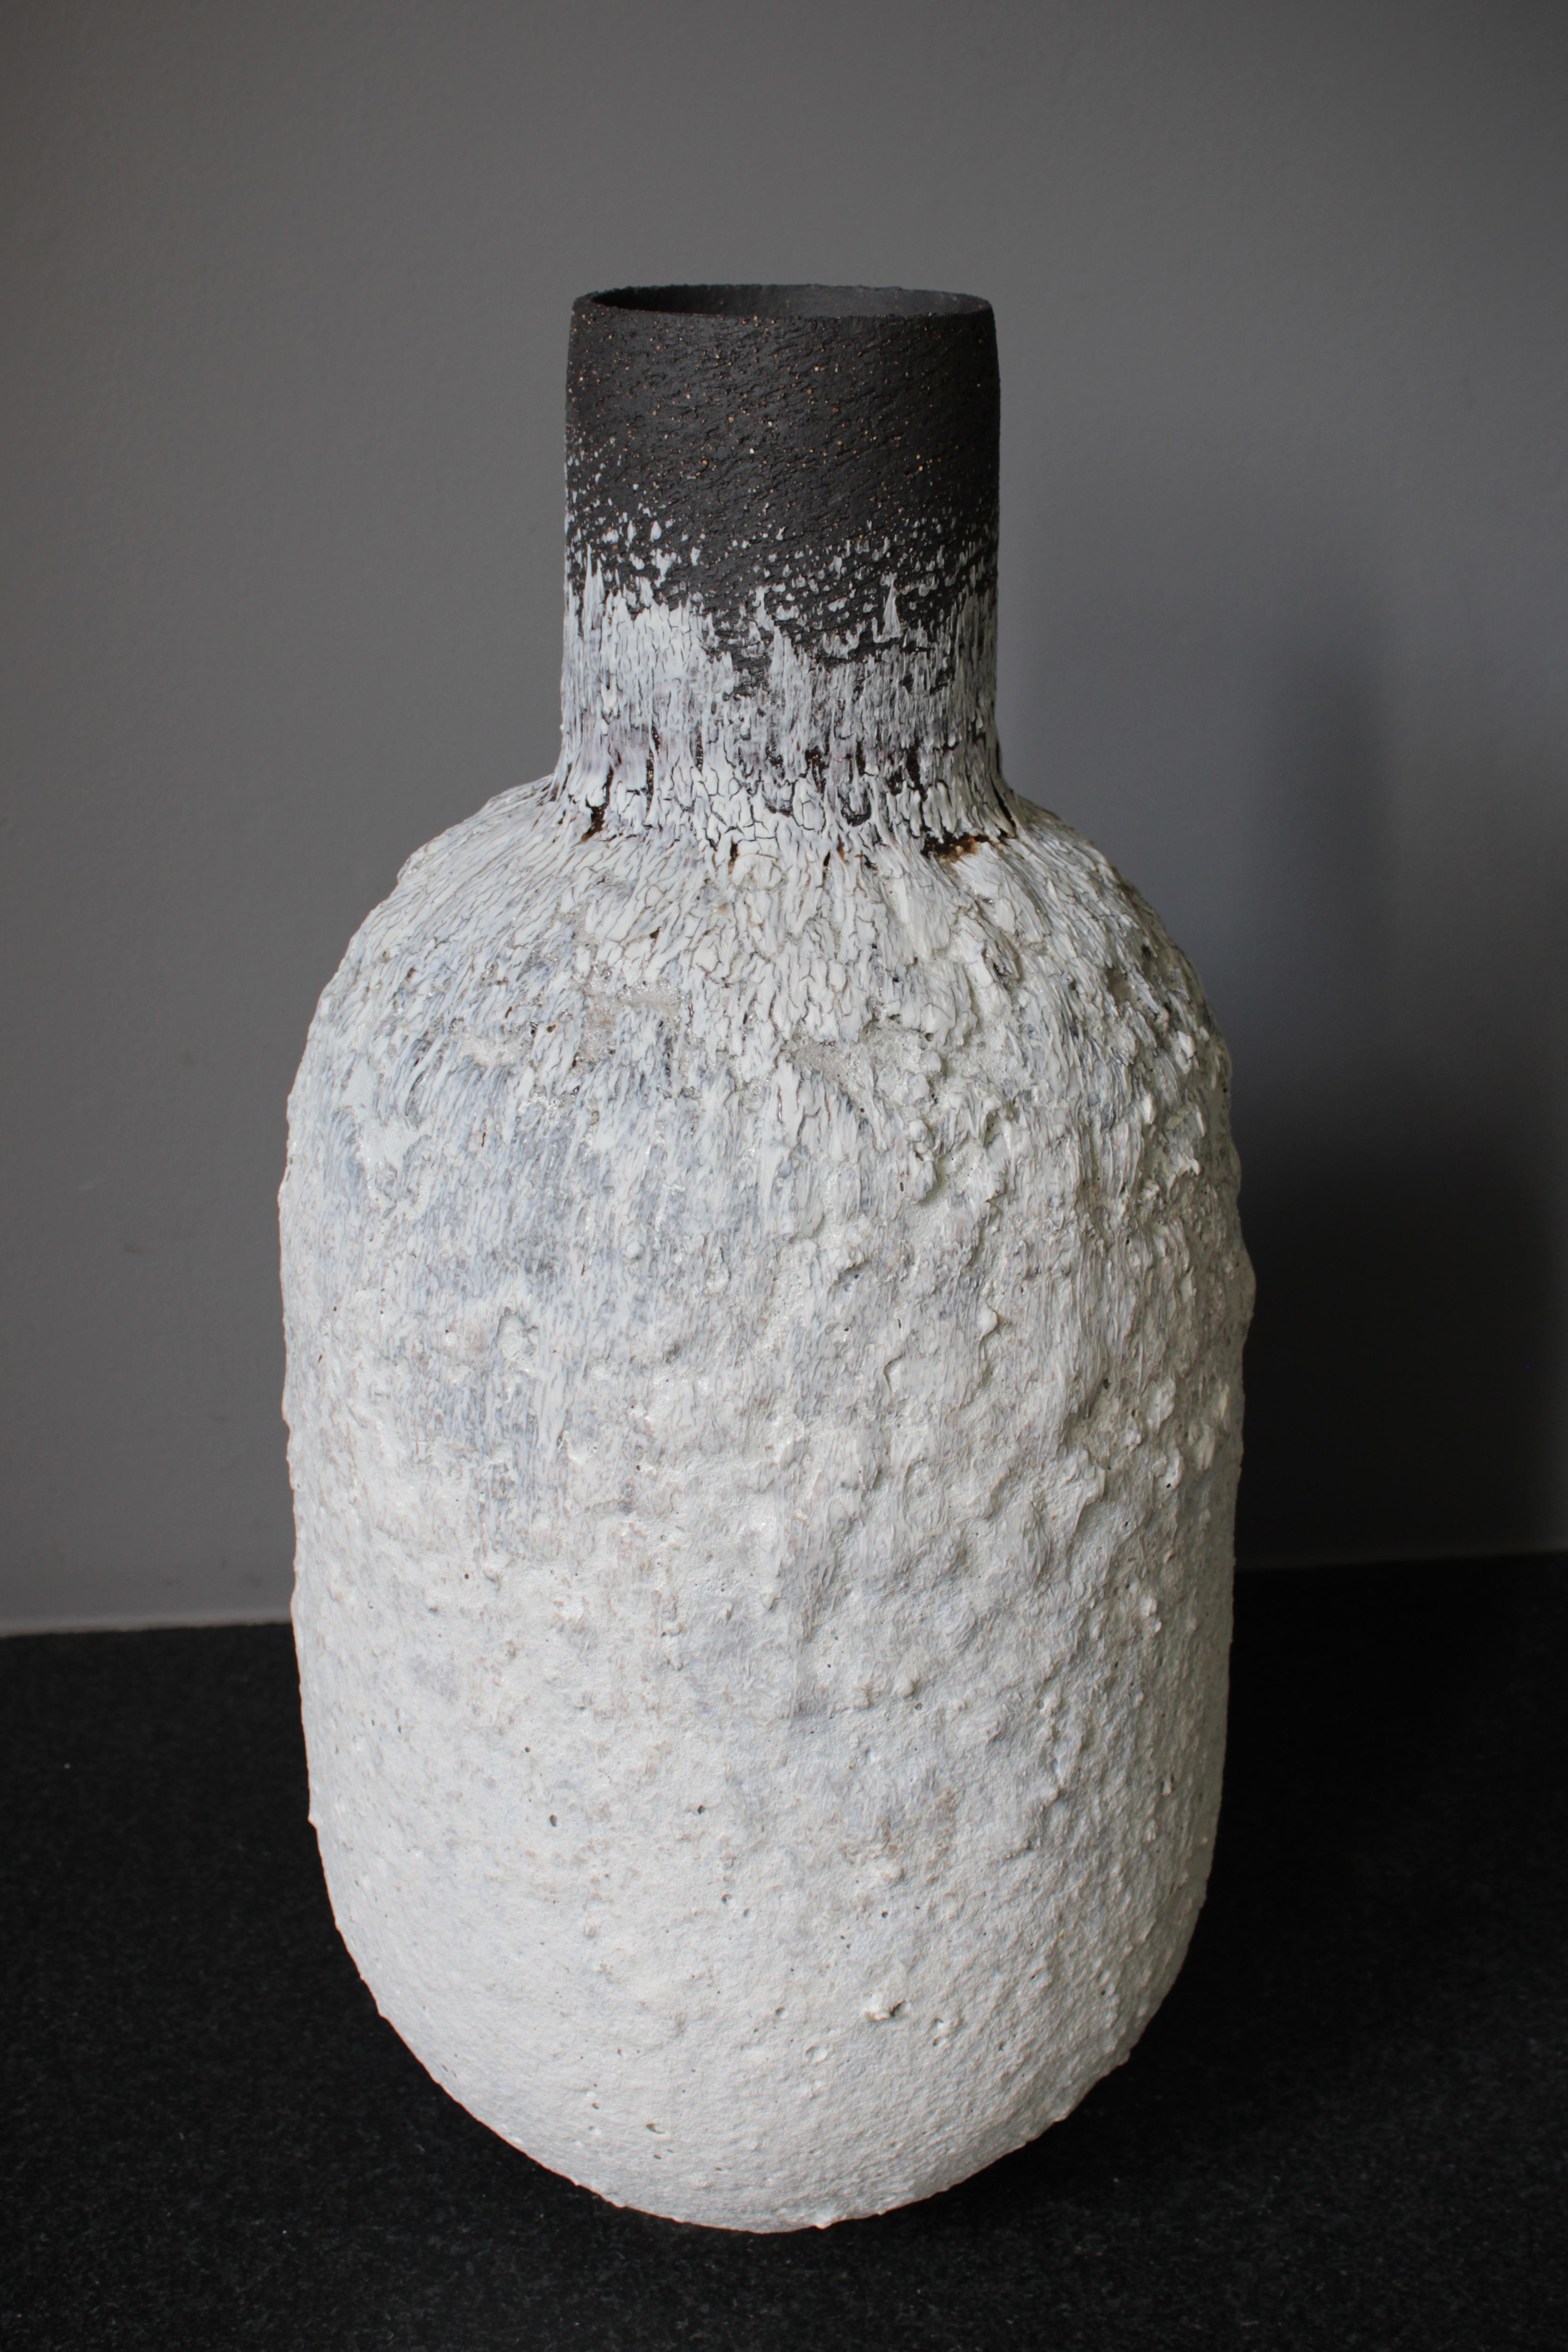 Tall large bottle shaped white and black stoneware clay and porcelain vessel with heavy volcanic textured glaze.

The work is hand built using a combination of stoneware black and buff clays, volcanic slips are added under glaze. Multiple firings